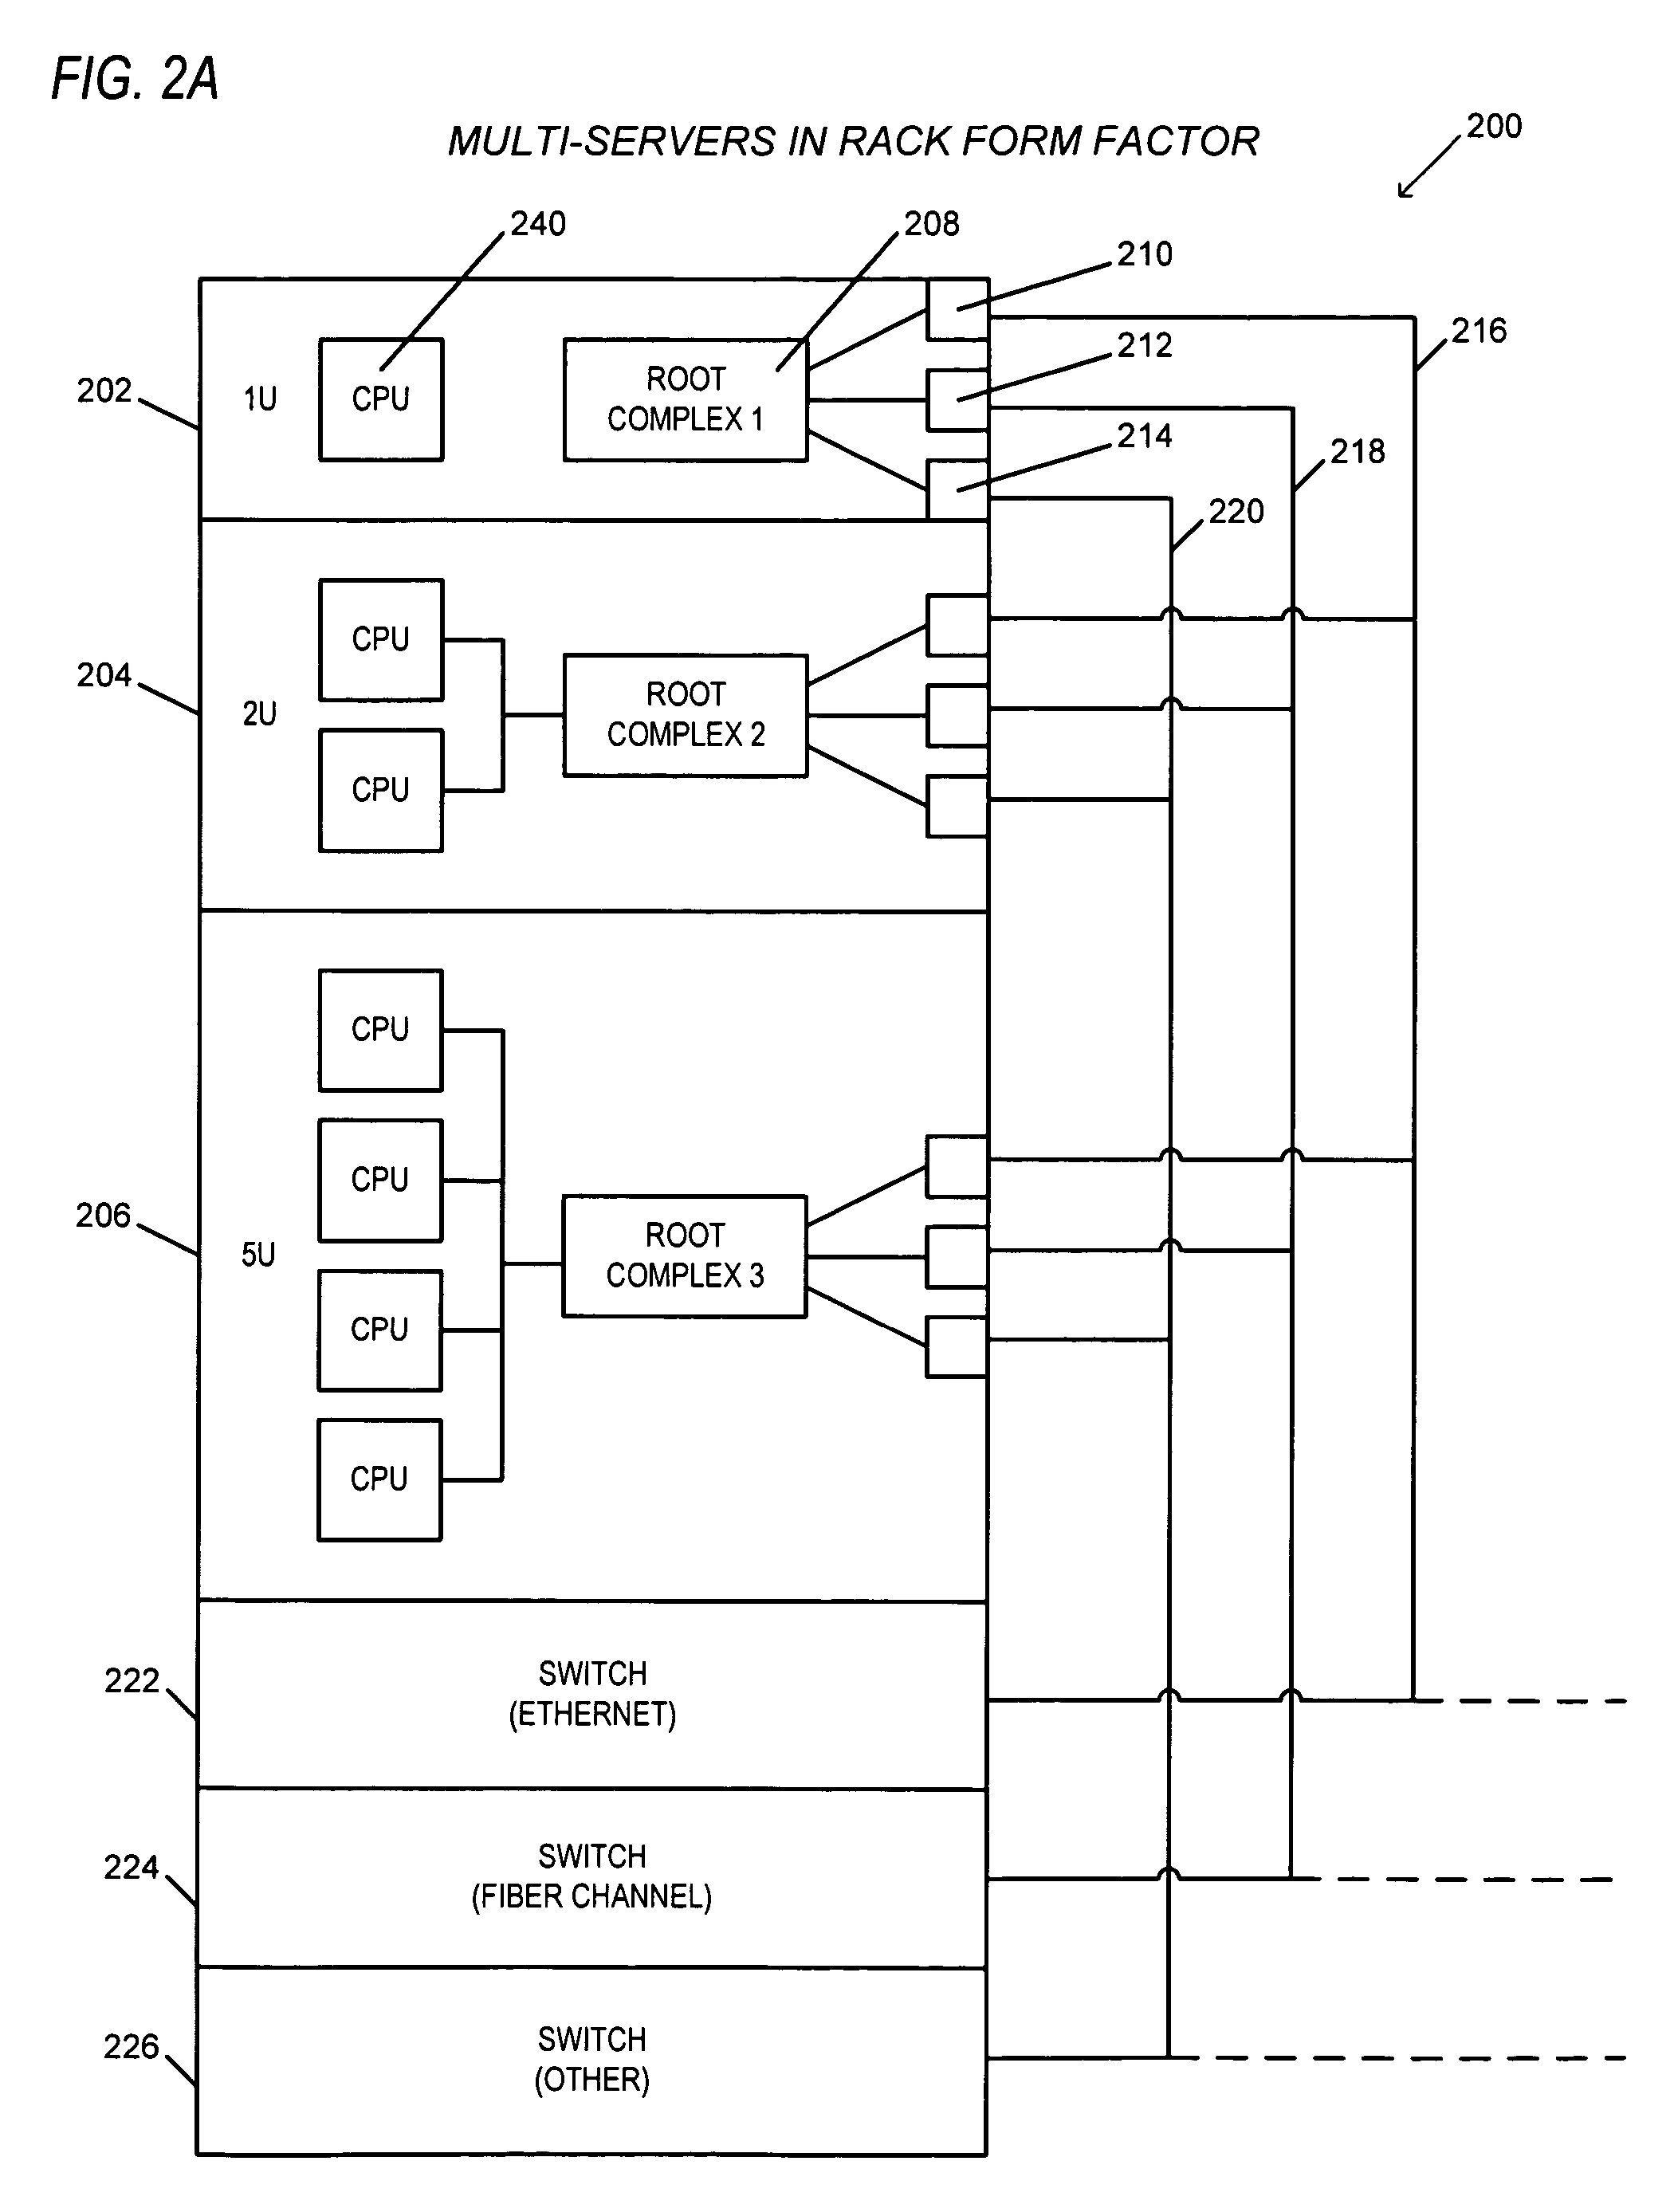 Switching apparatus and method for providing shared I/O within a load-store fabric